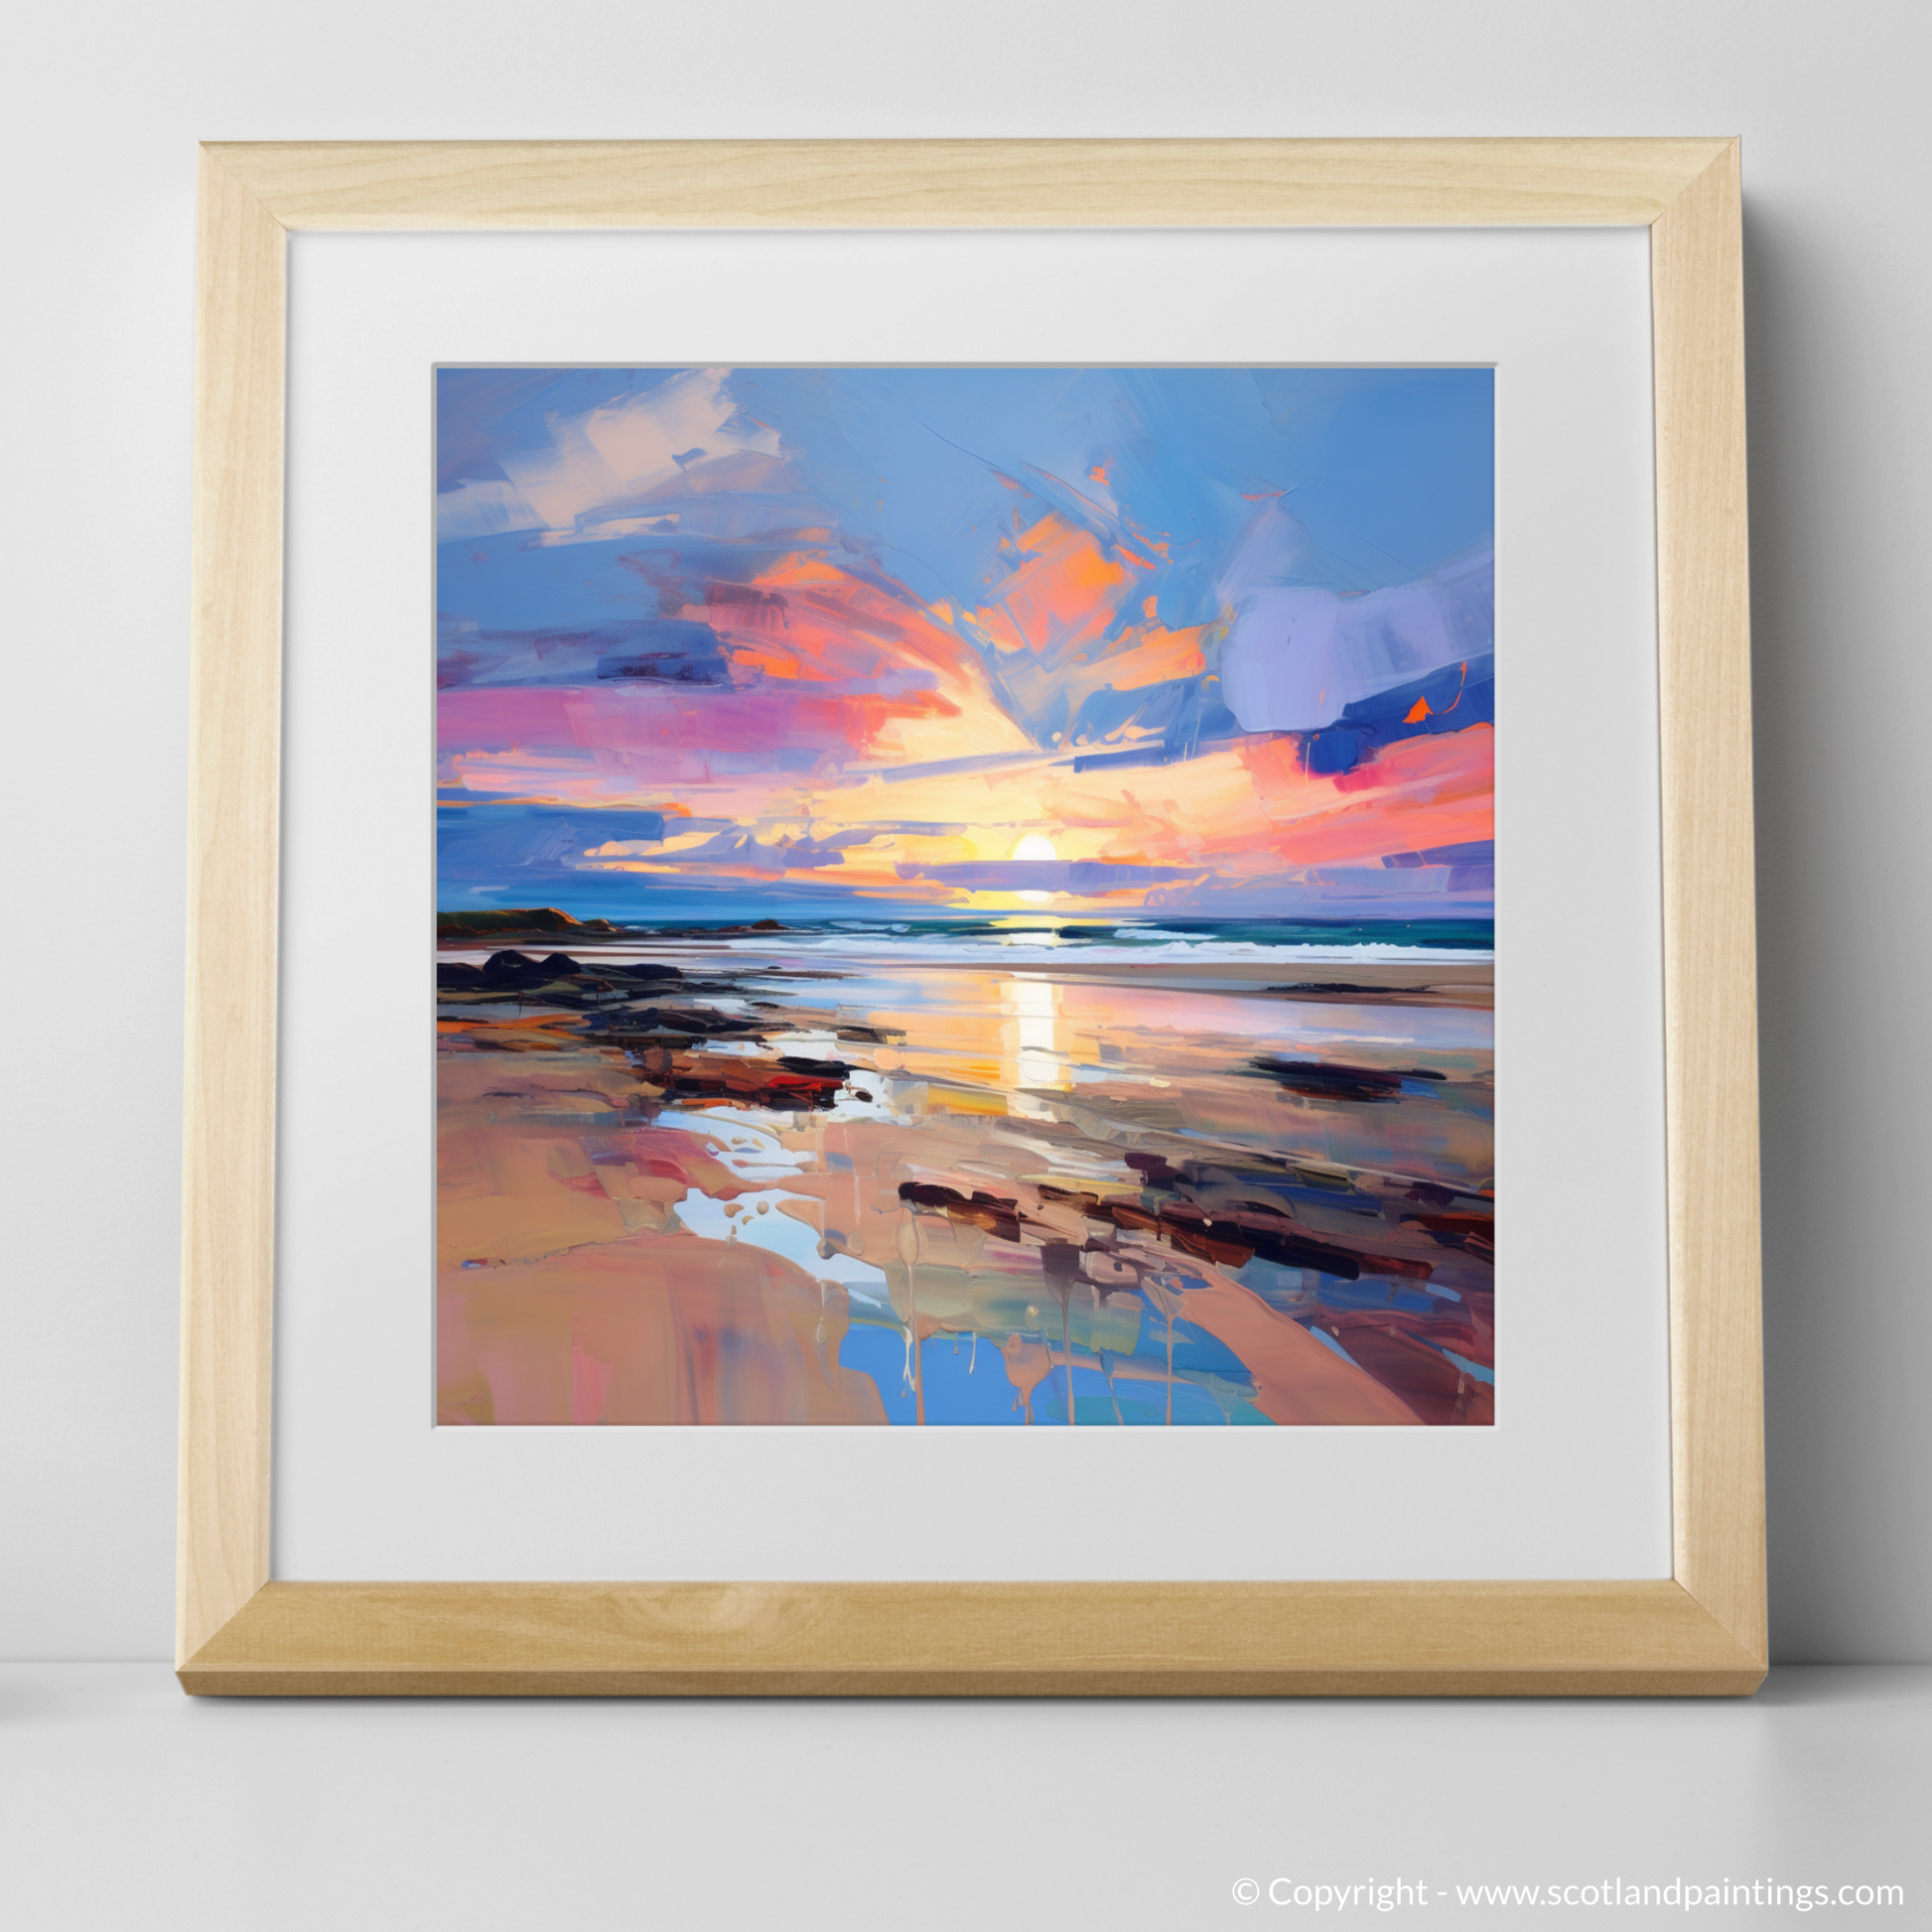 Art Print of St Cyrus Beach at sunset with a natural frame